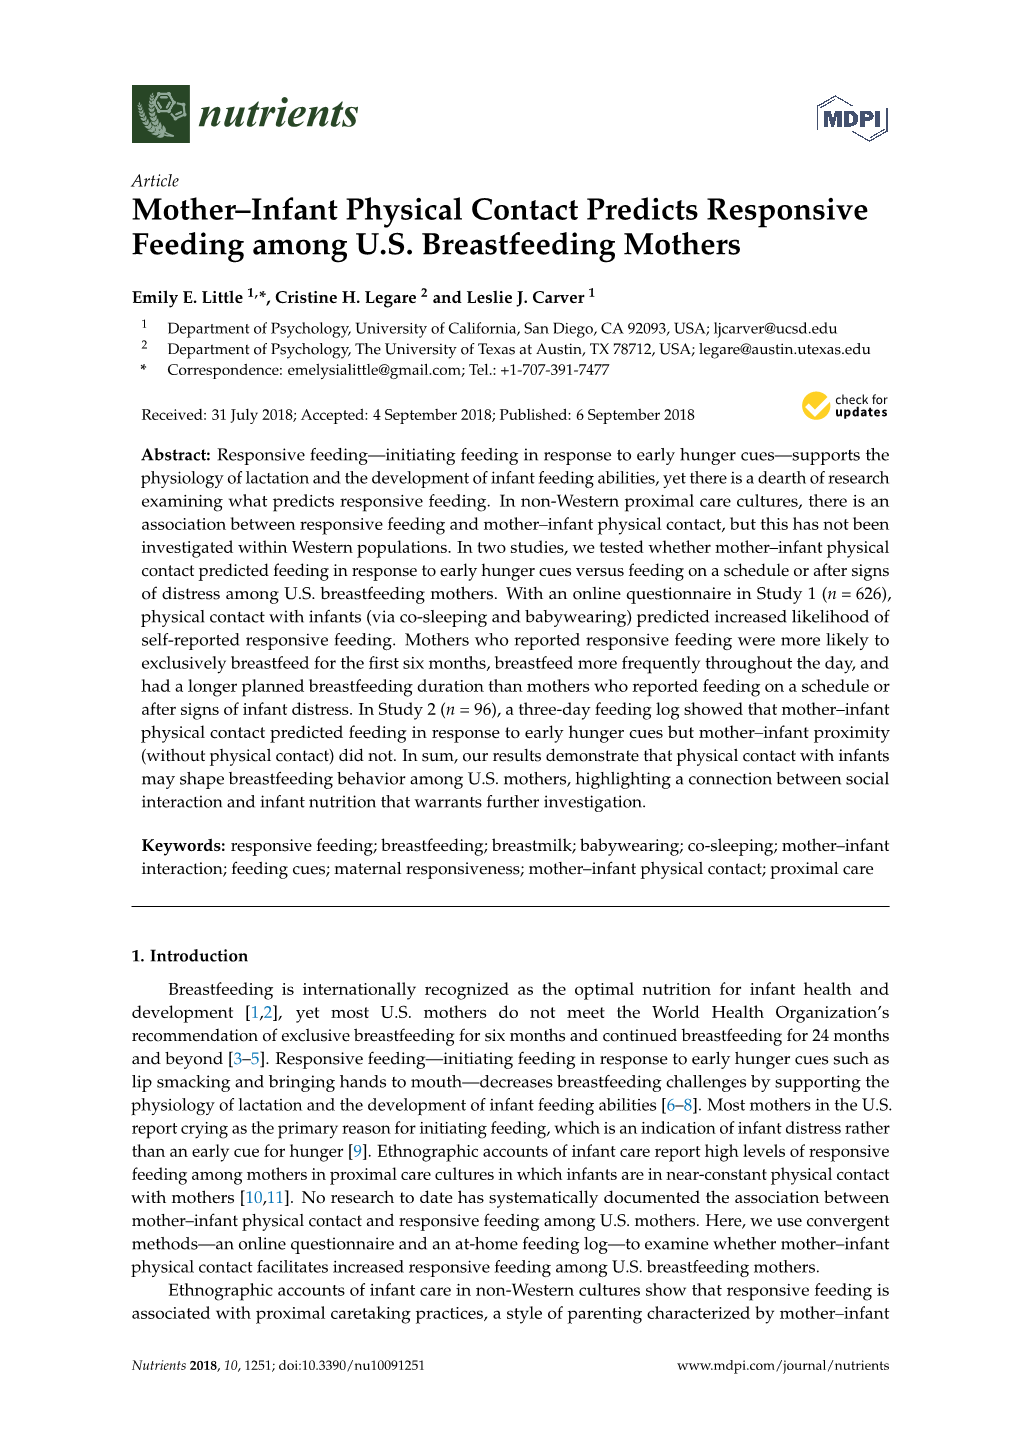 Mother–Infant Physical Contact Predicts Responsive Feeding Among U.S. Breastfeeding Mothers